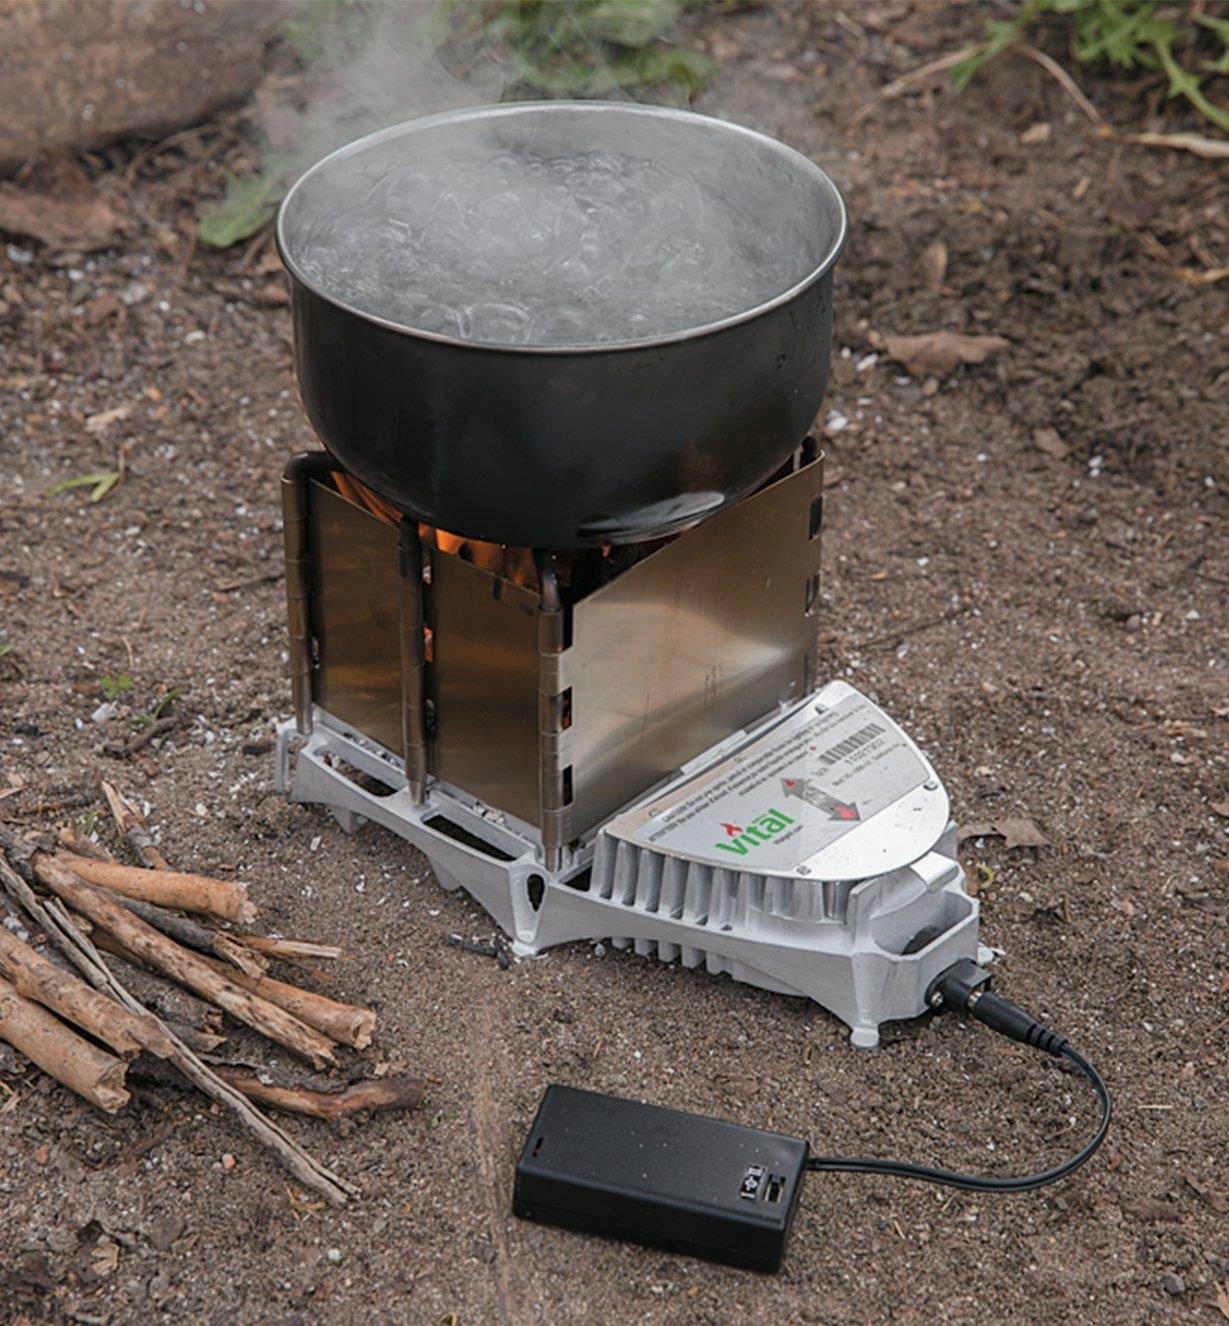 Boiling water in a pot on a VitalGrill Camp Stove